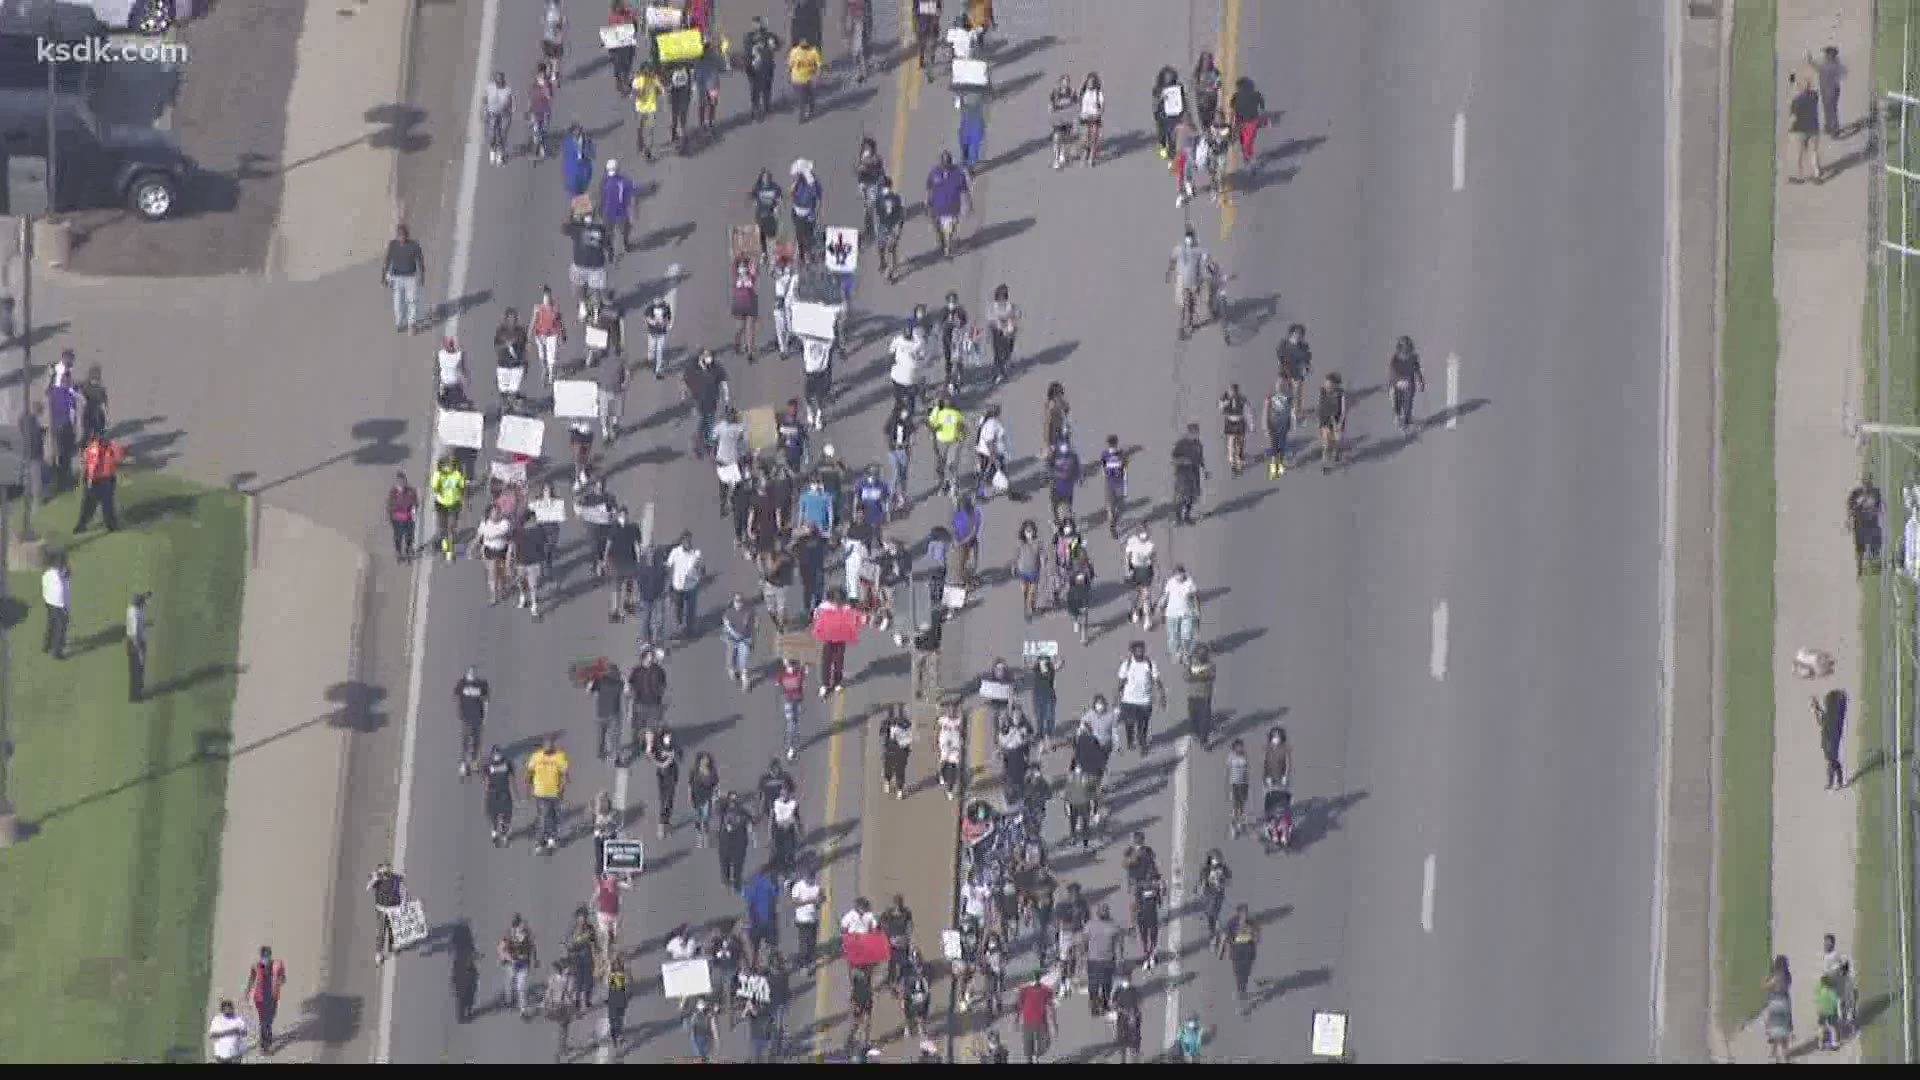 At about 5:15 p.m., the demonstrators stopped on the road and gathered outside the Florissant Police Department